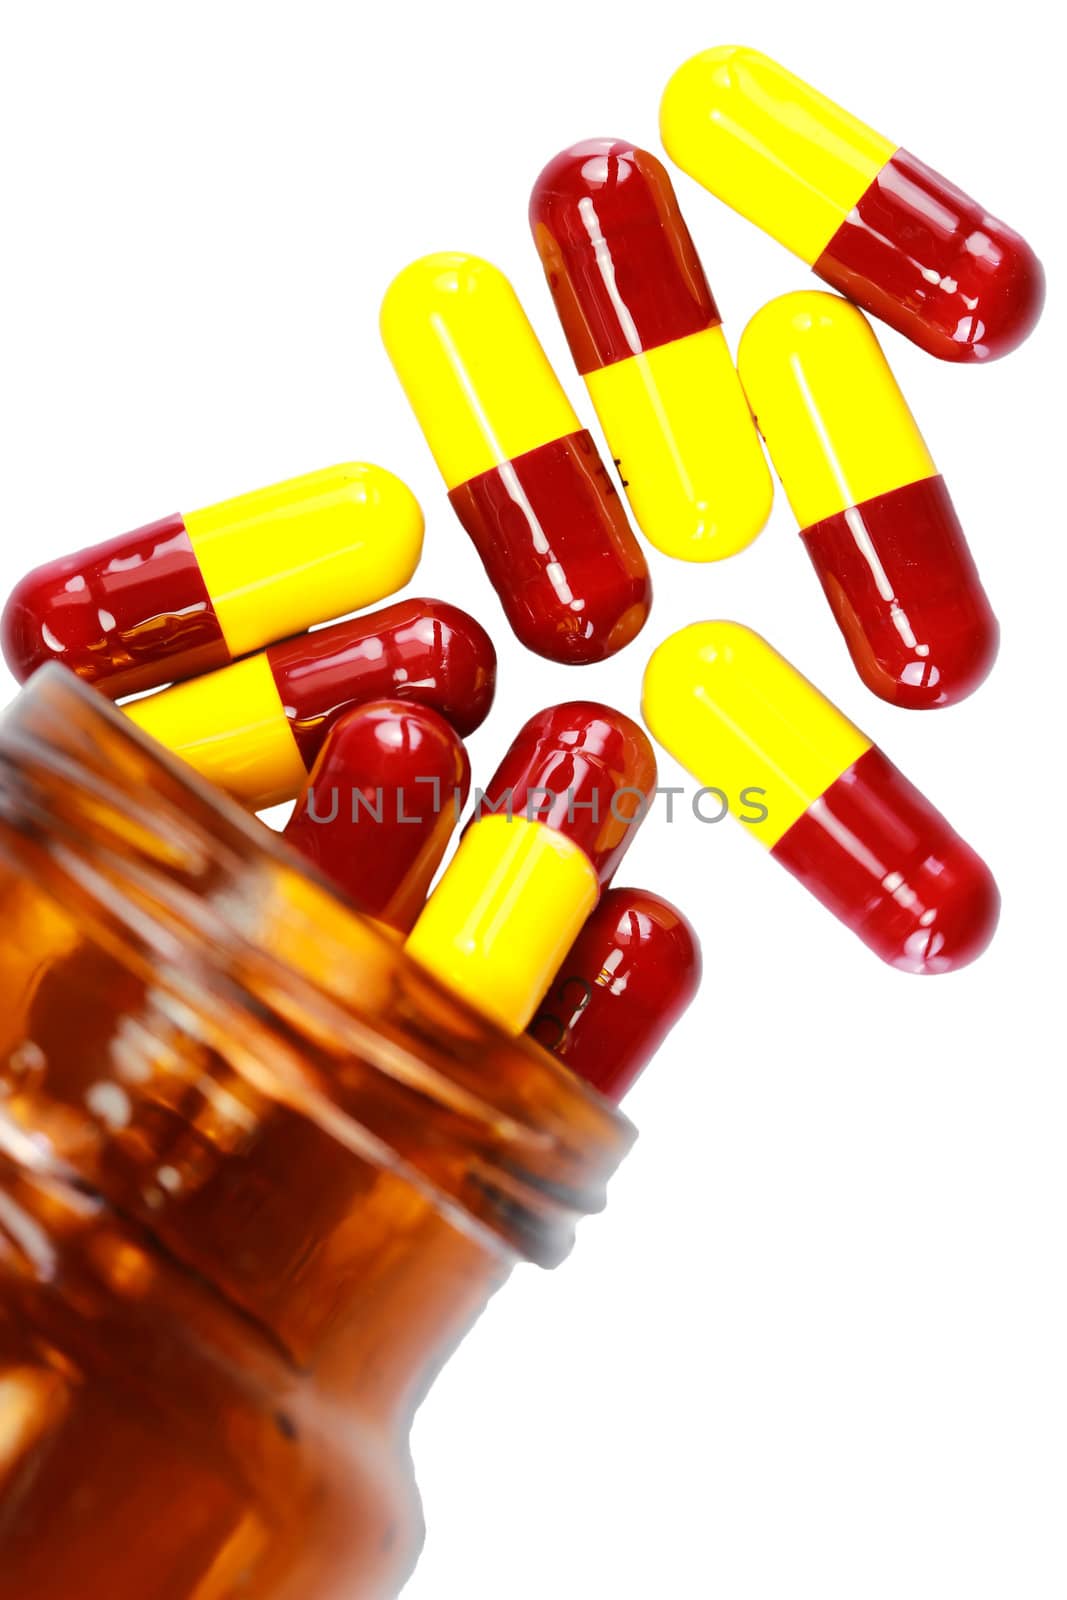 Closeup of pills isolated on a white background by bajita111122